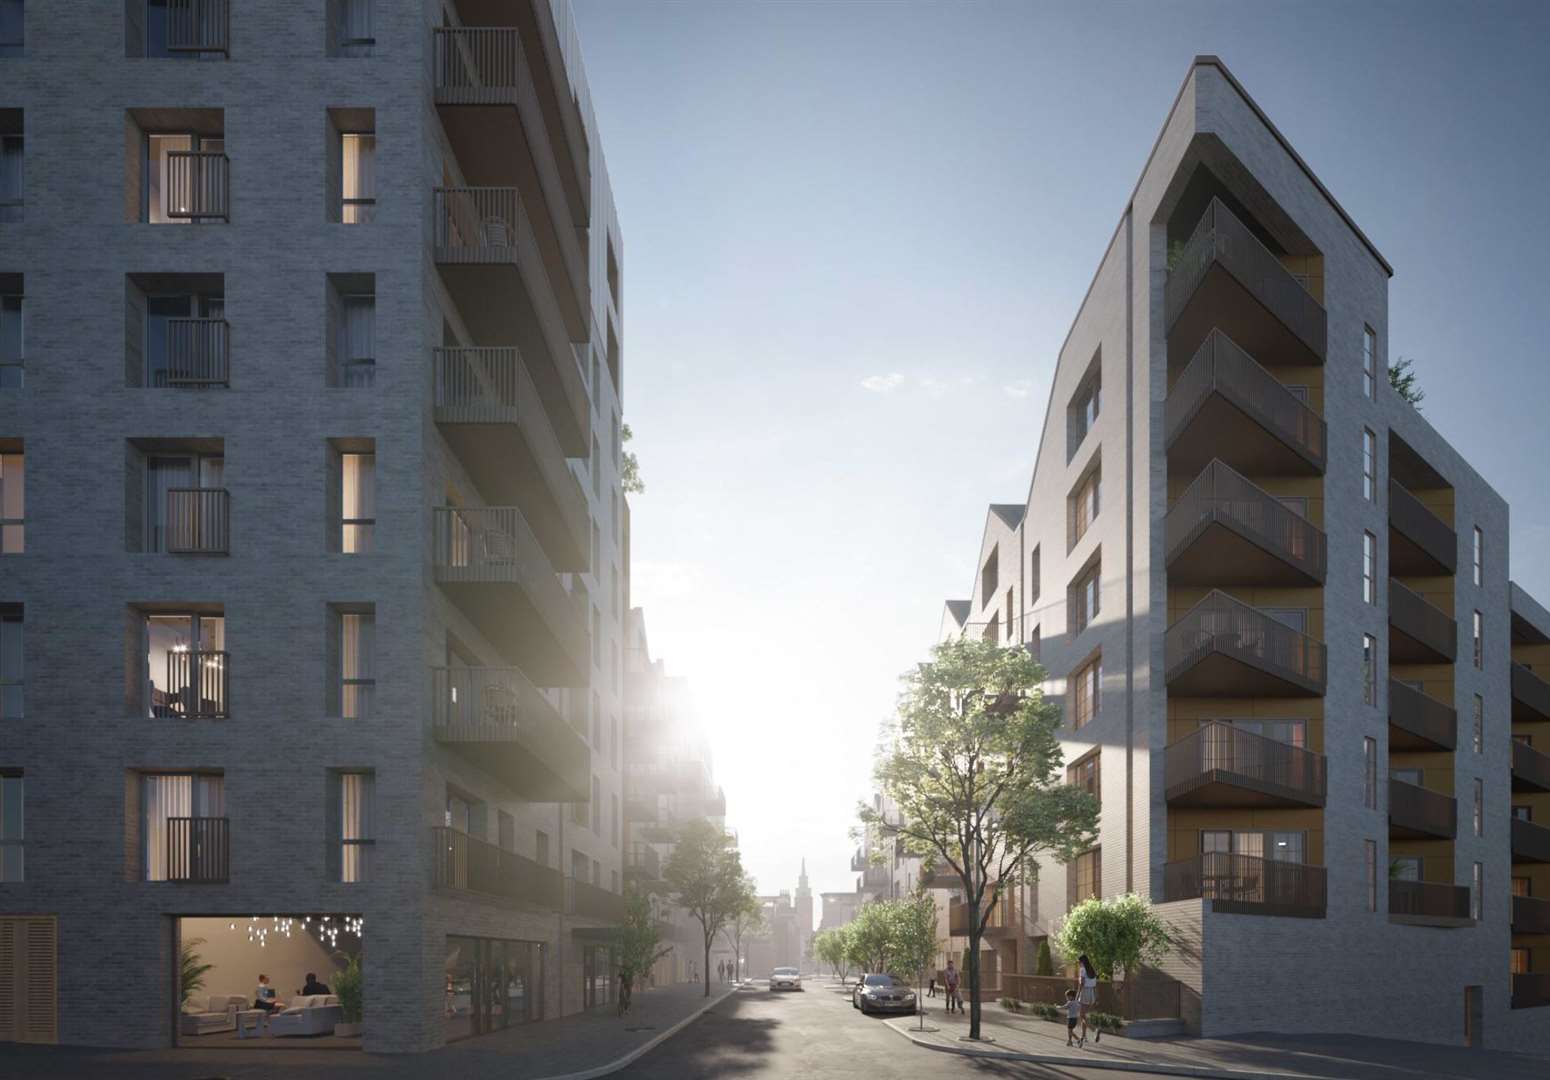 New homes are a key part of regeneration in Gravesend